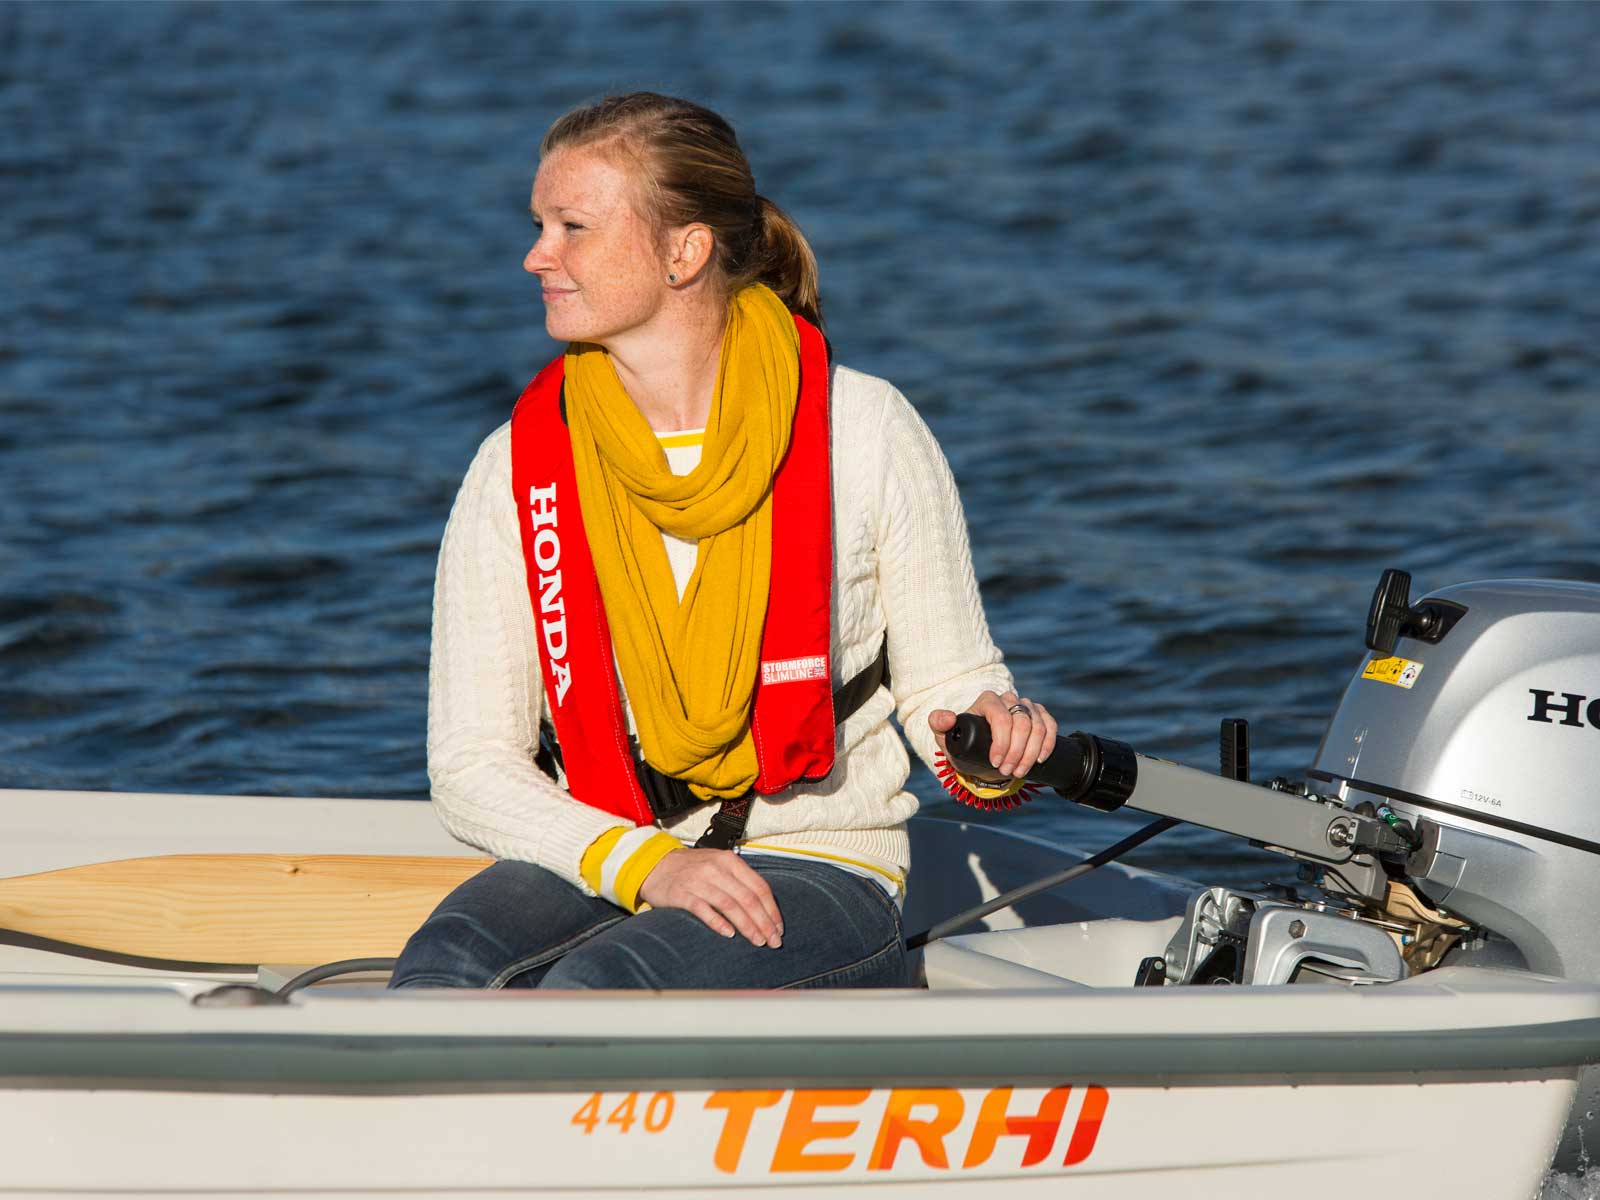 Terhi 440 | Boat Solutions, Utting am Ammersee